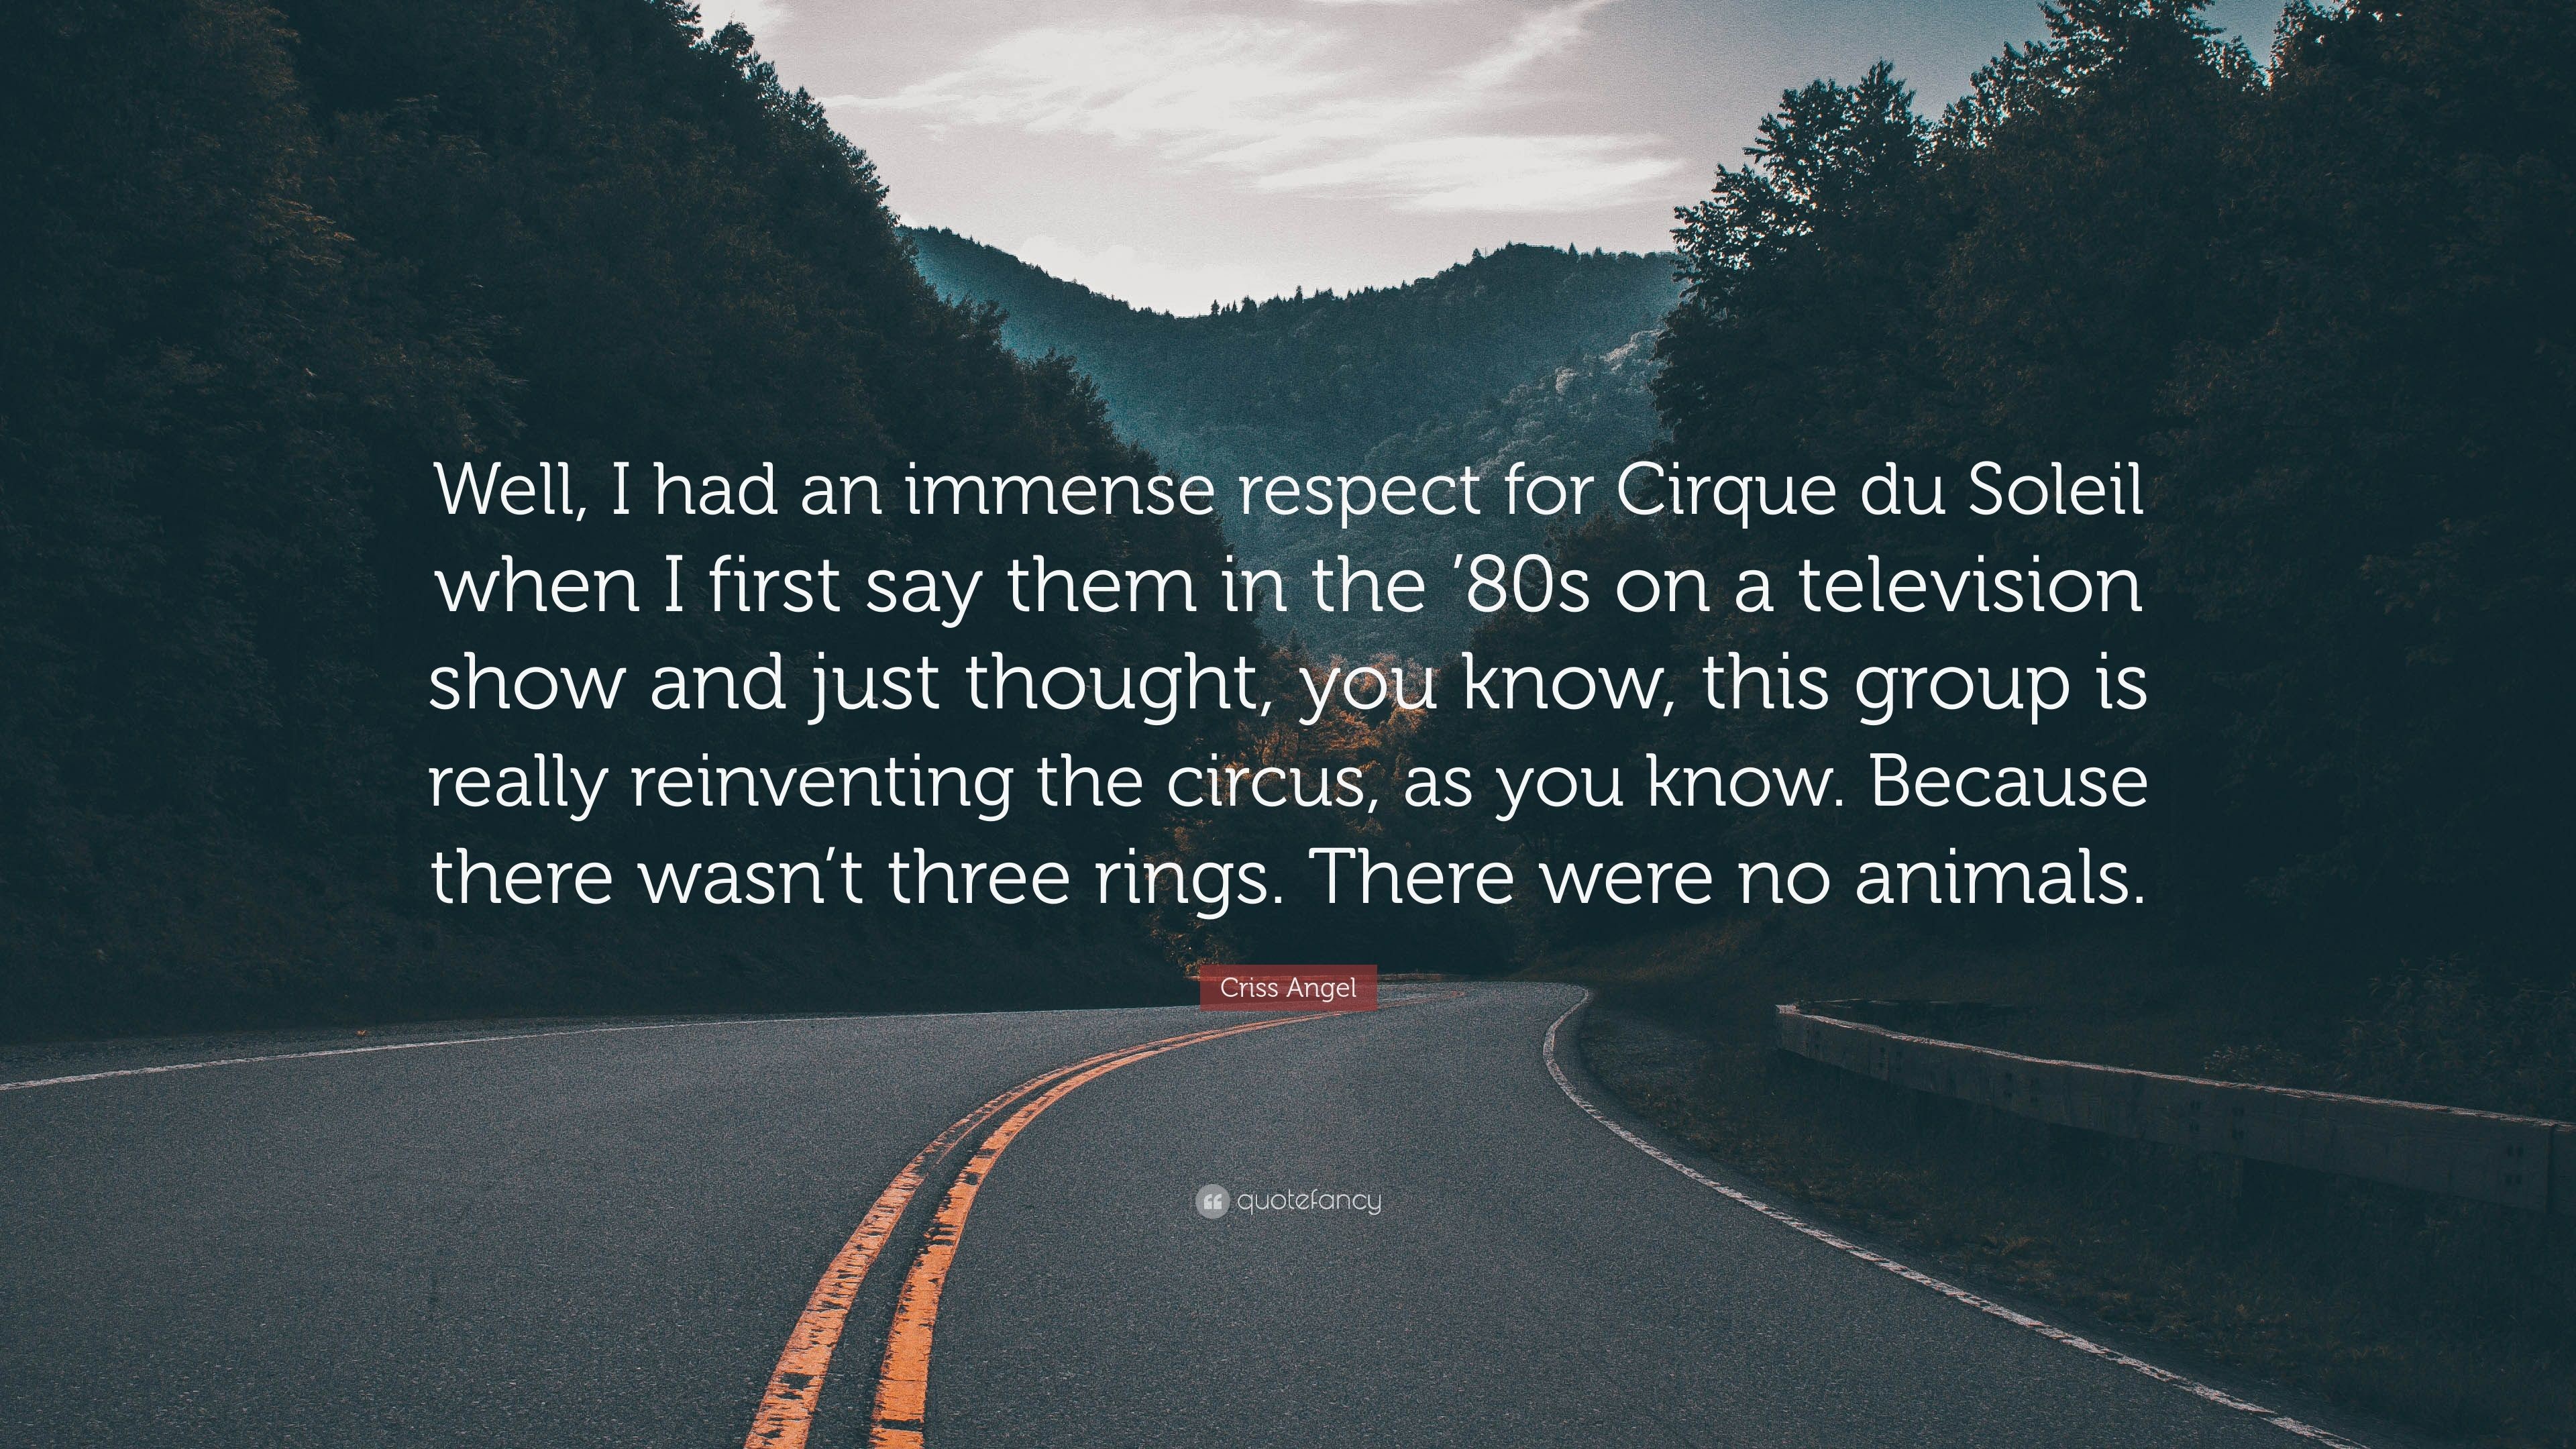 3840x2160 Criss Angel Quote: "Well, I had an immense respect for Cirqu...